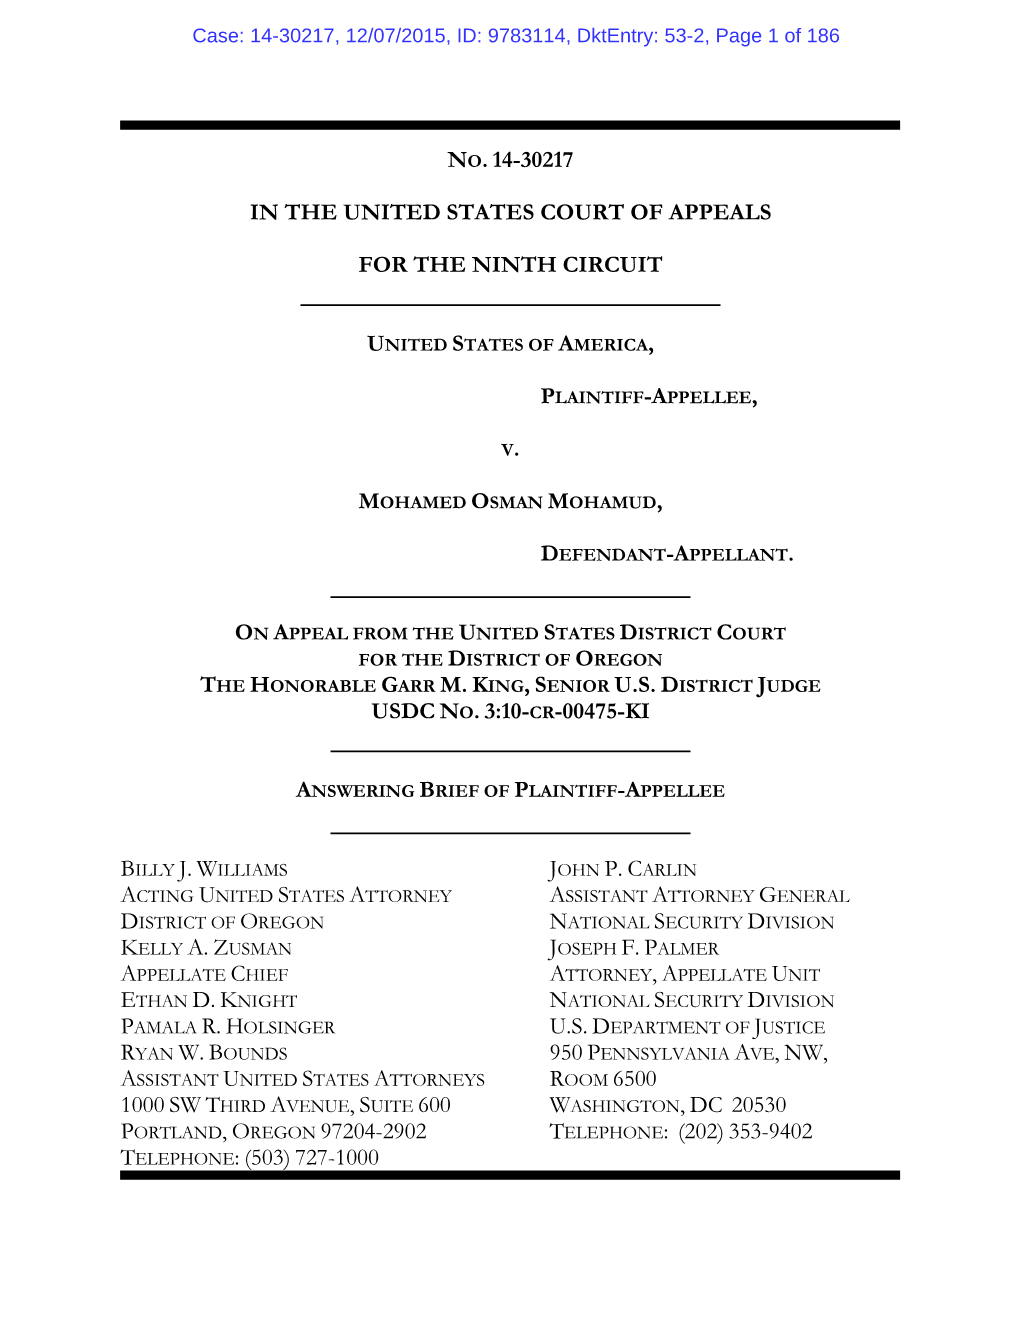 No. 14-30217 in the United States Court of Appeals